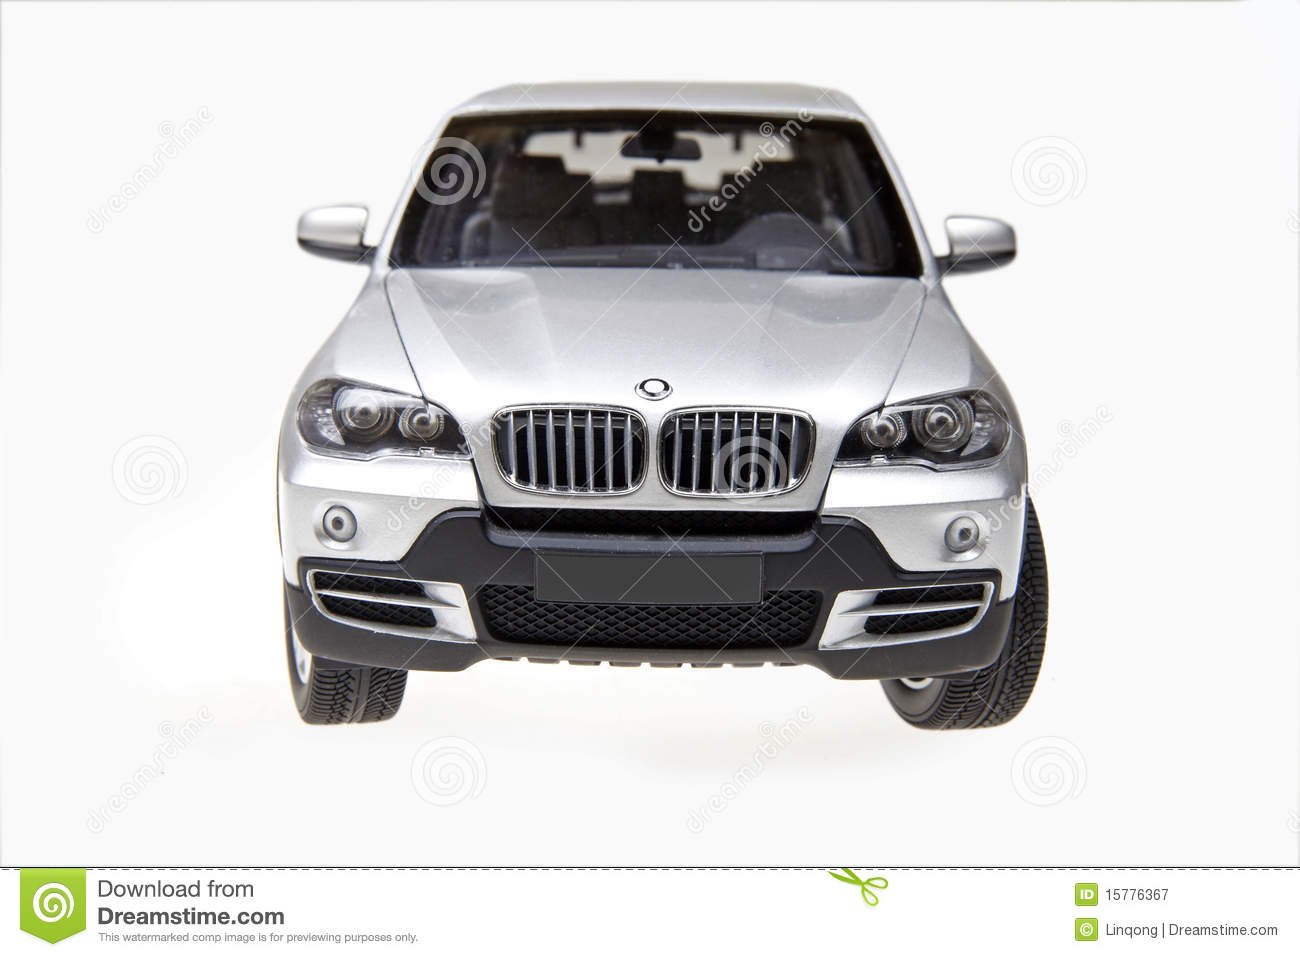 Bmw Suv Royalty Free Stock Photography   Image  15776367